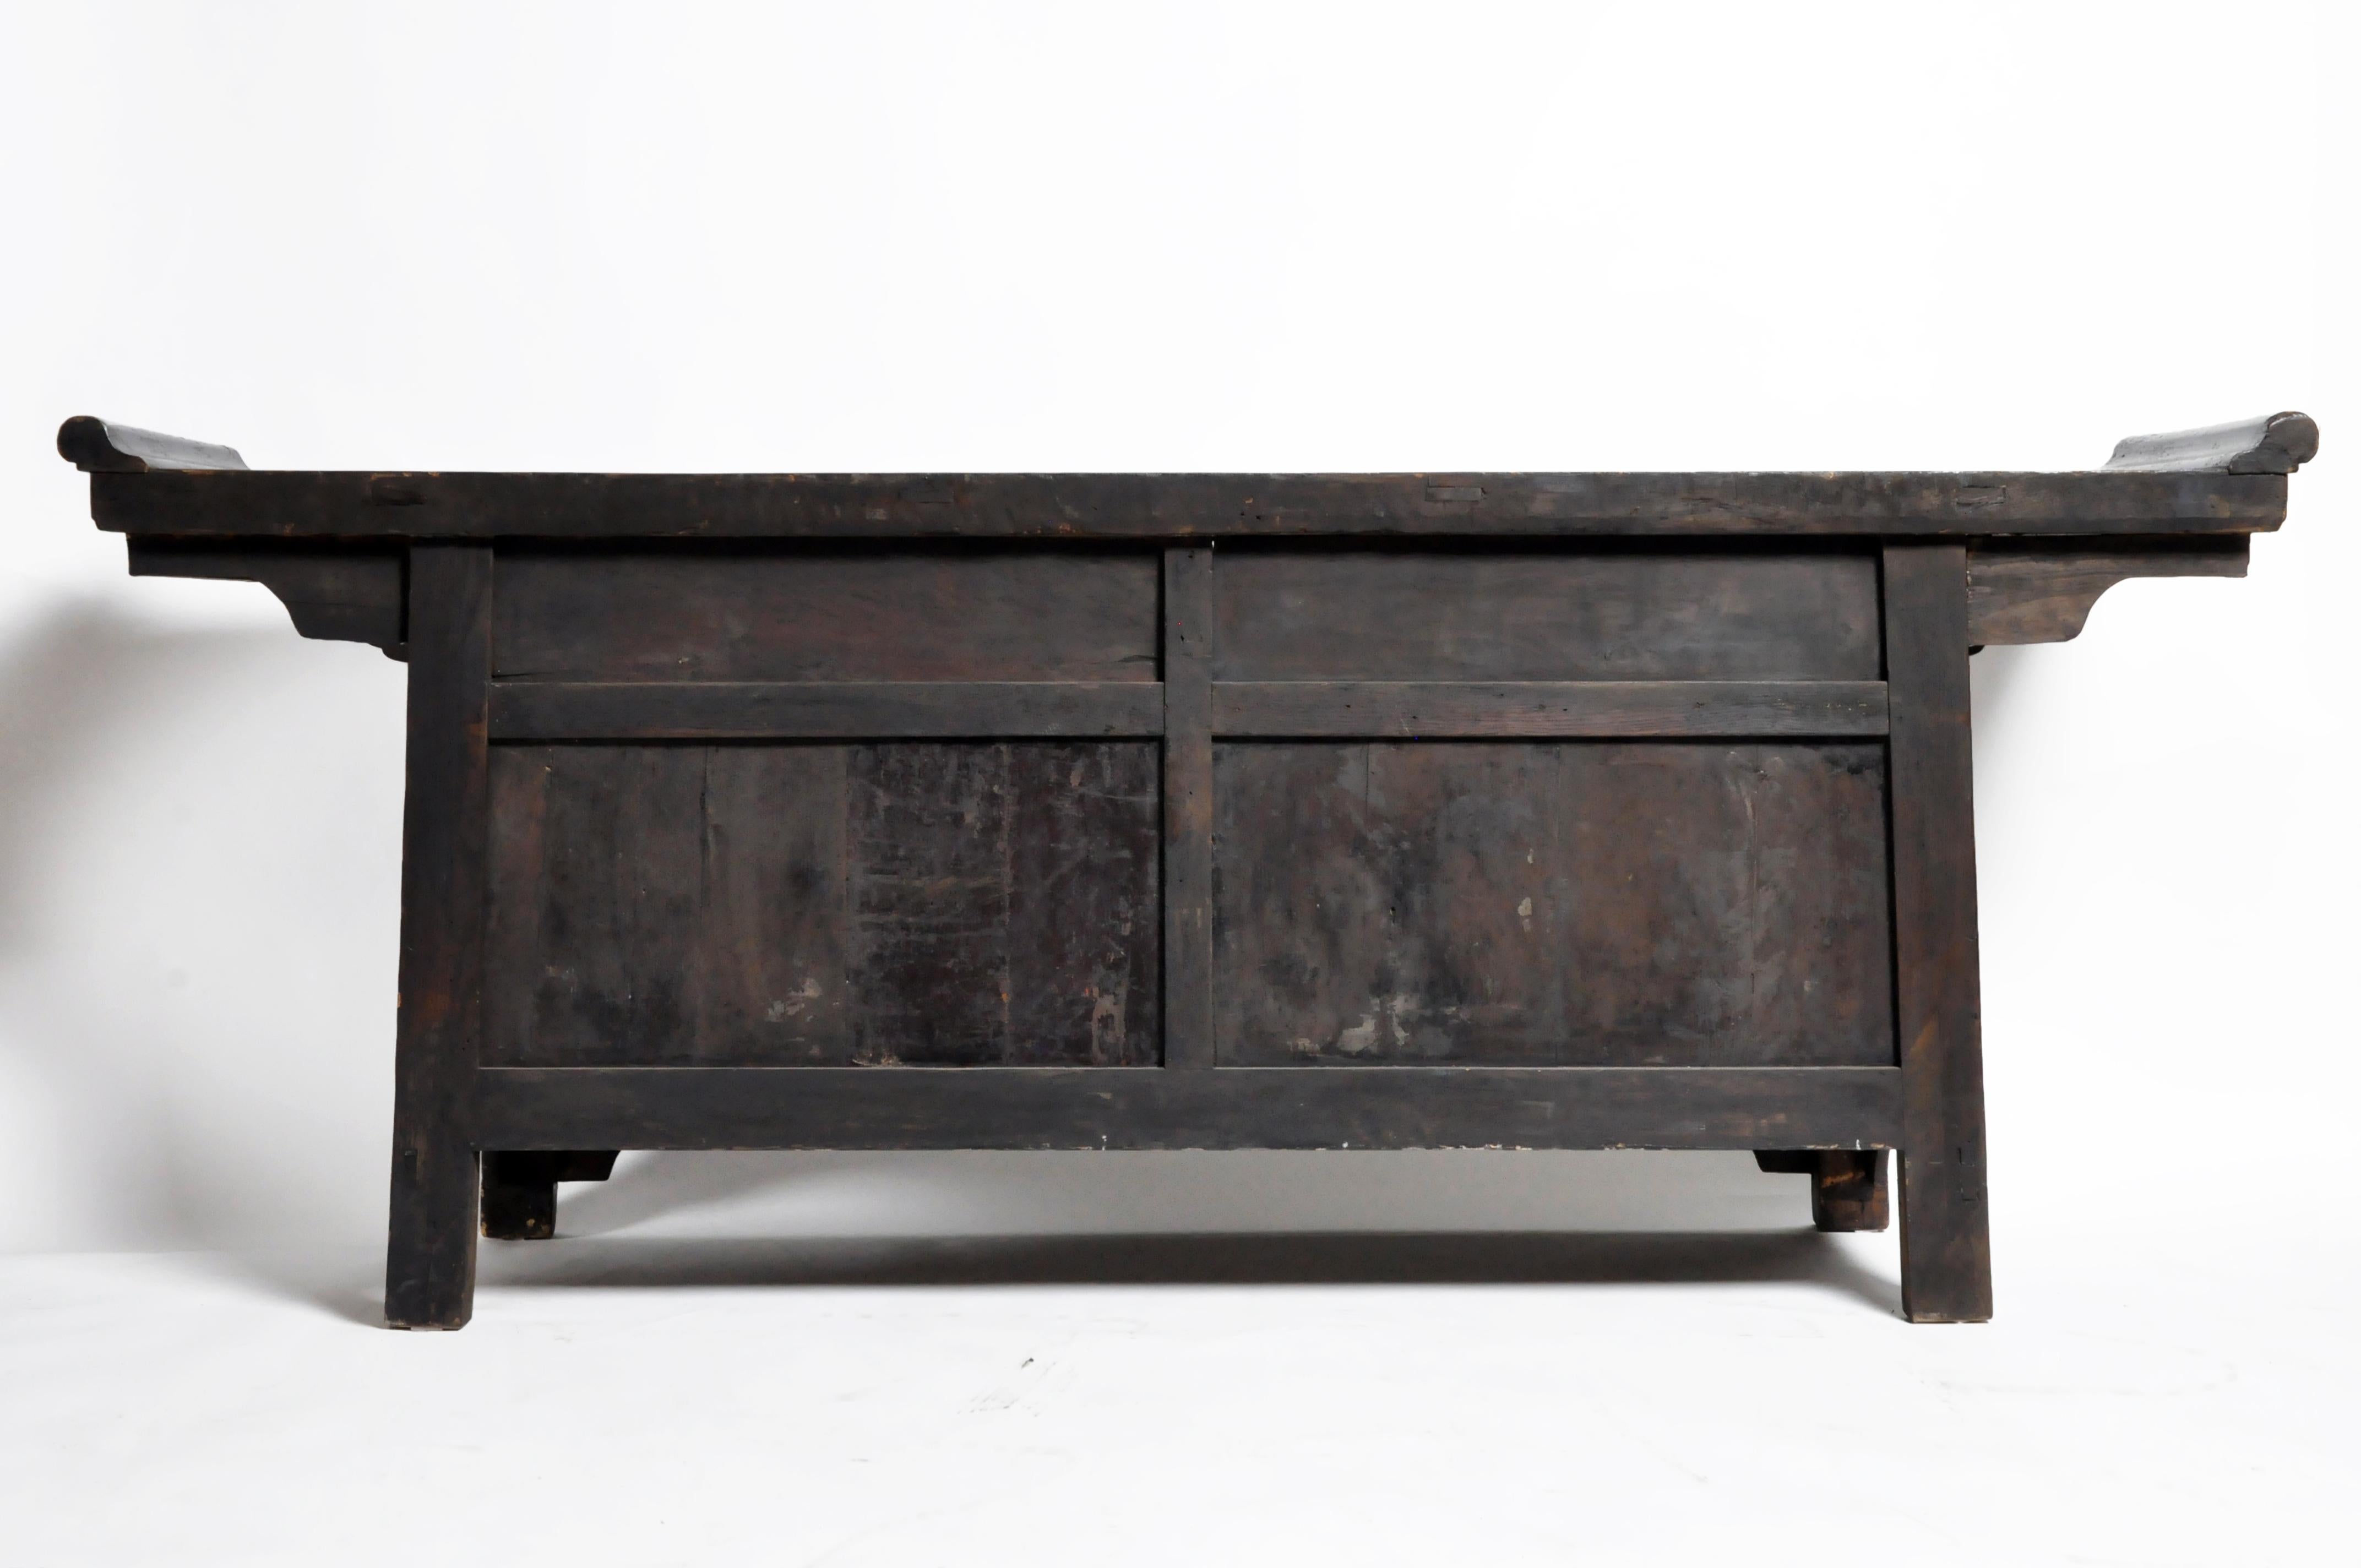 This gorgeous altar coffer is from the Shanxi Provence, China and was made from elm wood and oxblood lacquer, circa 1850. The piece features its beautifully aged original patina with three drawers and a pair of doors for storage.